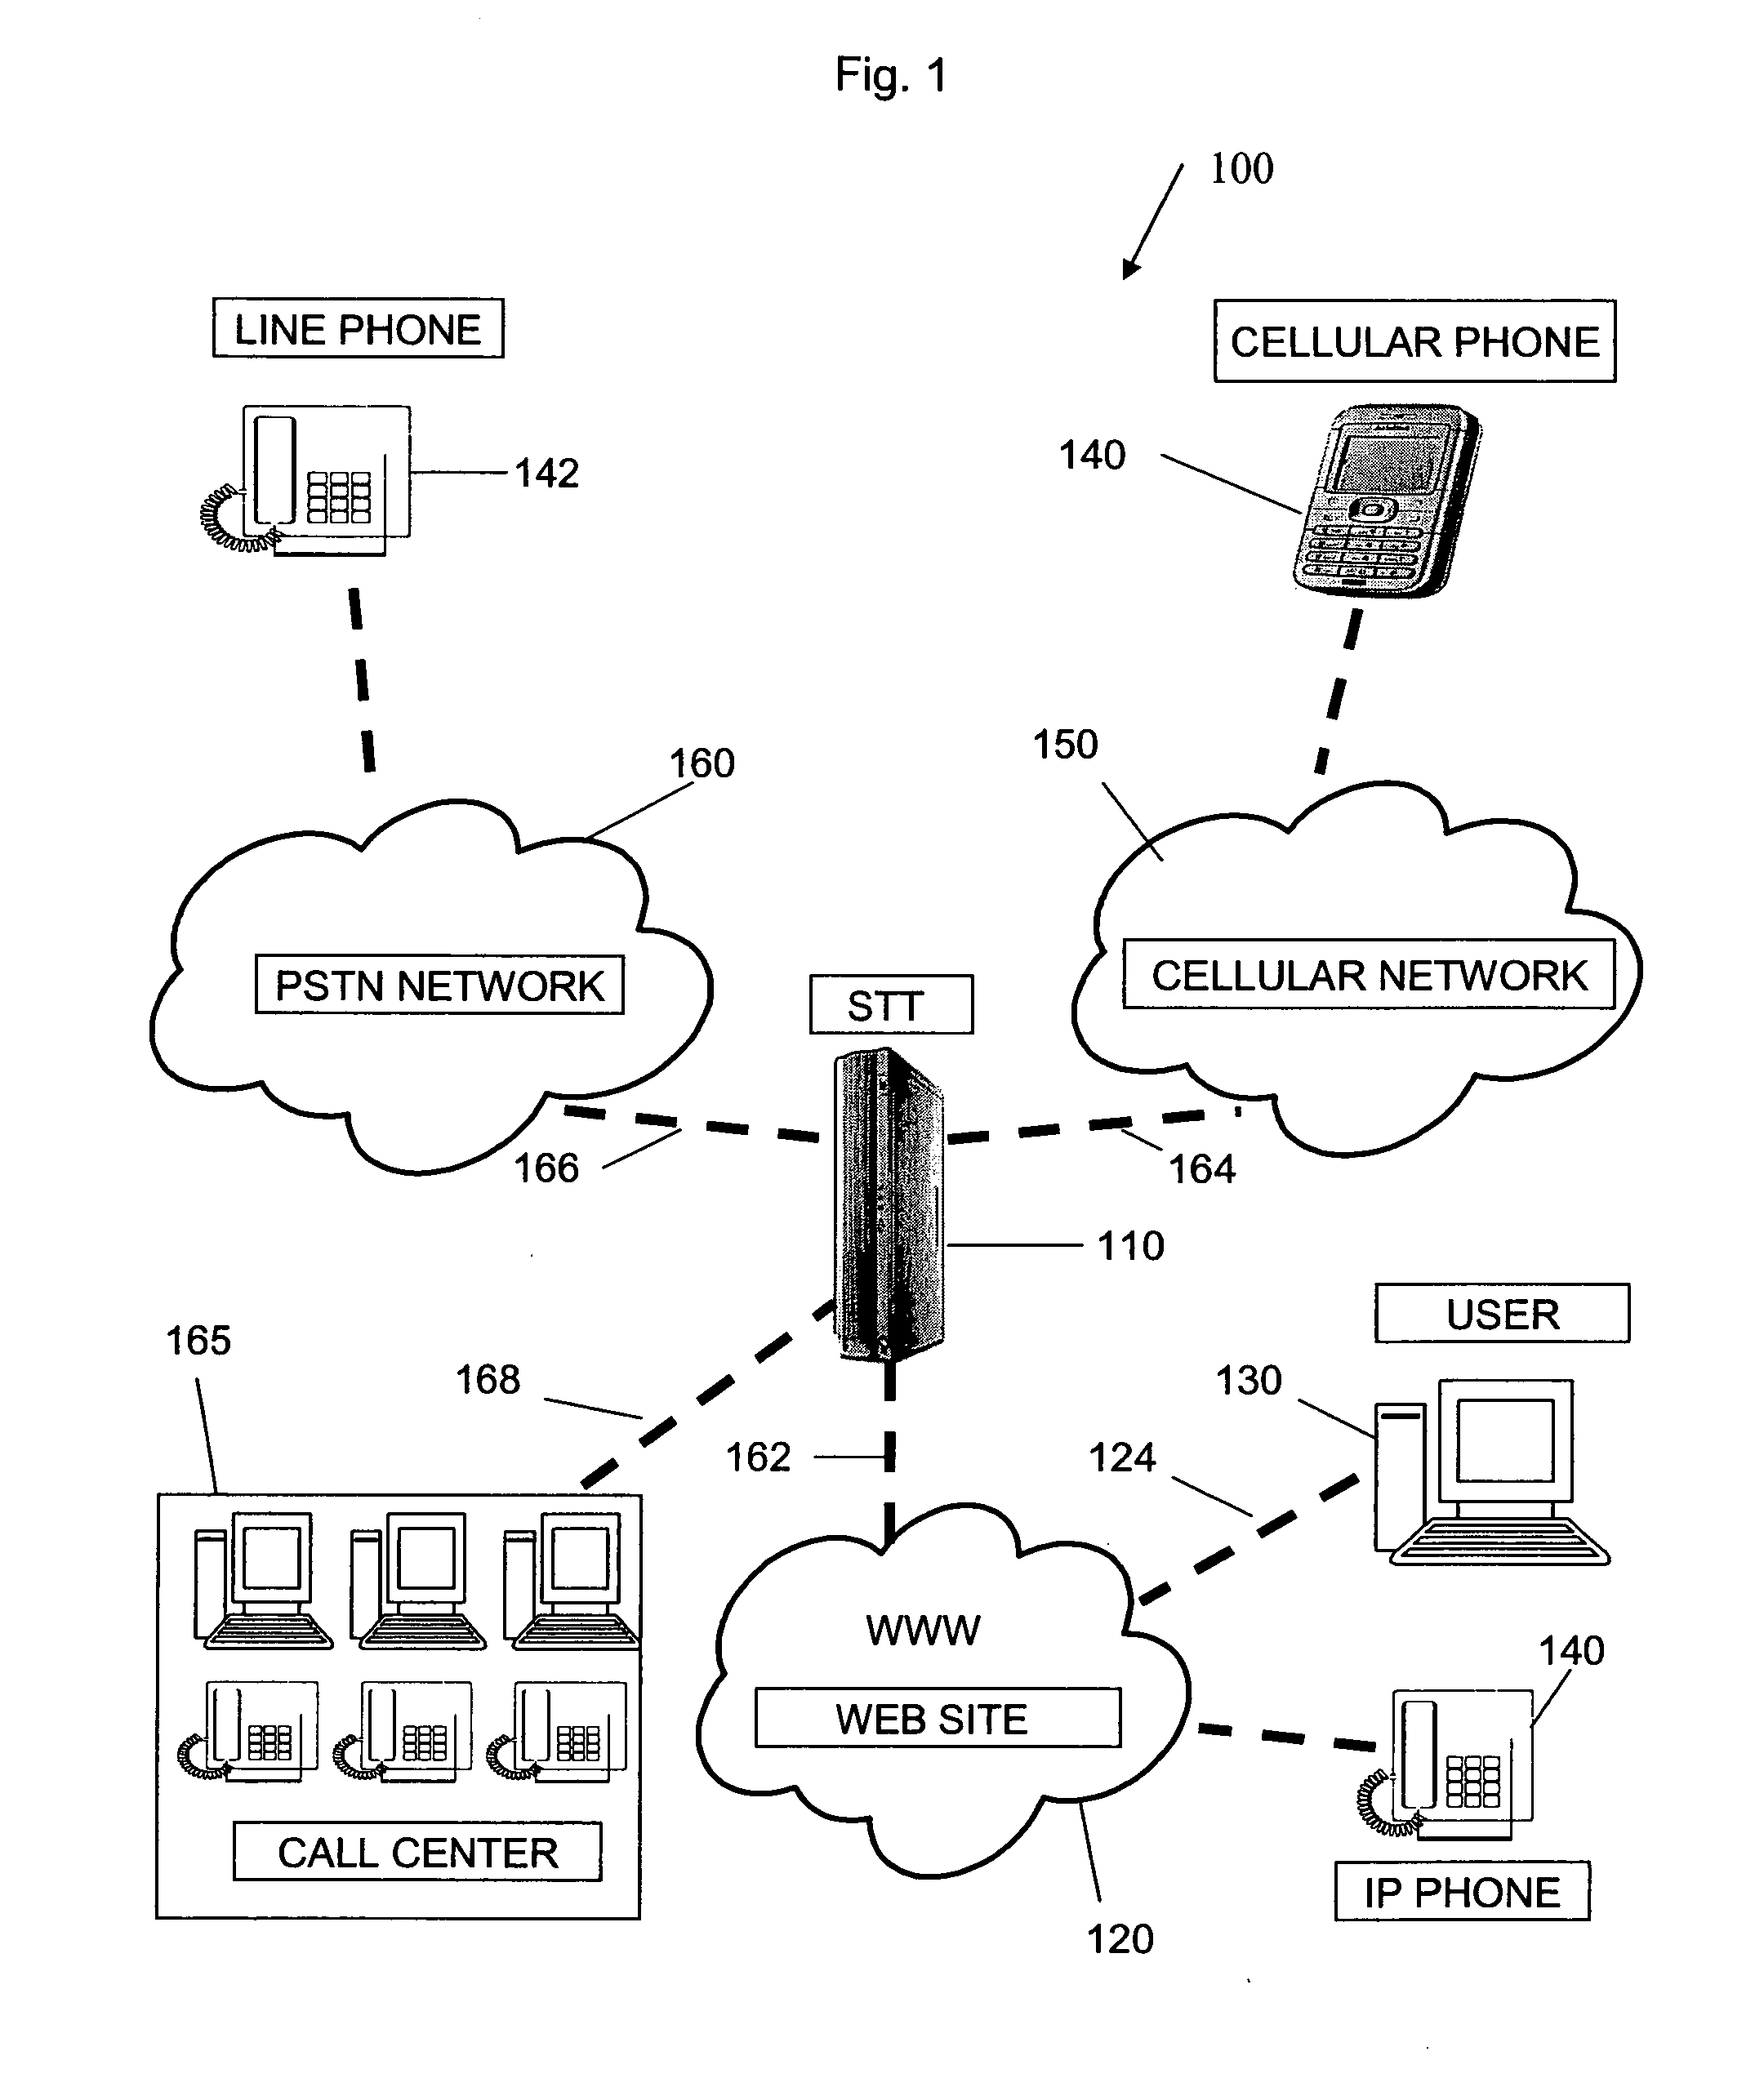 Vowel recognition system and method in speech to text applictions